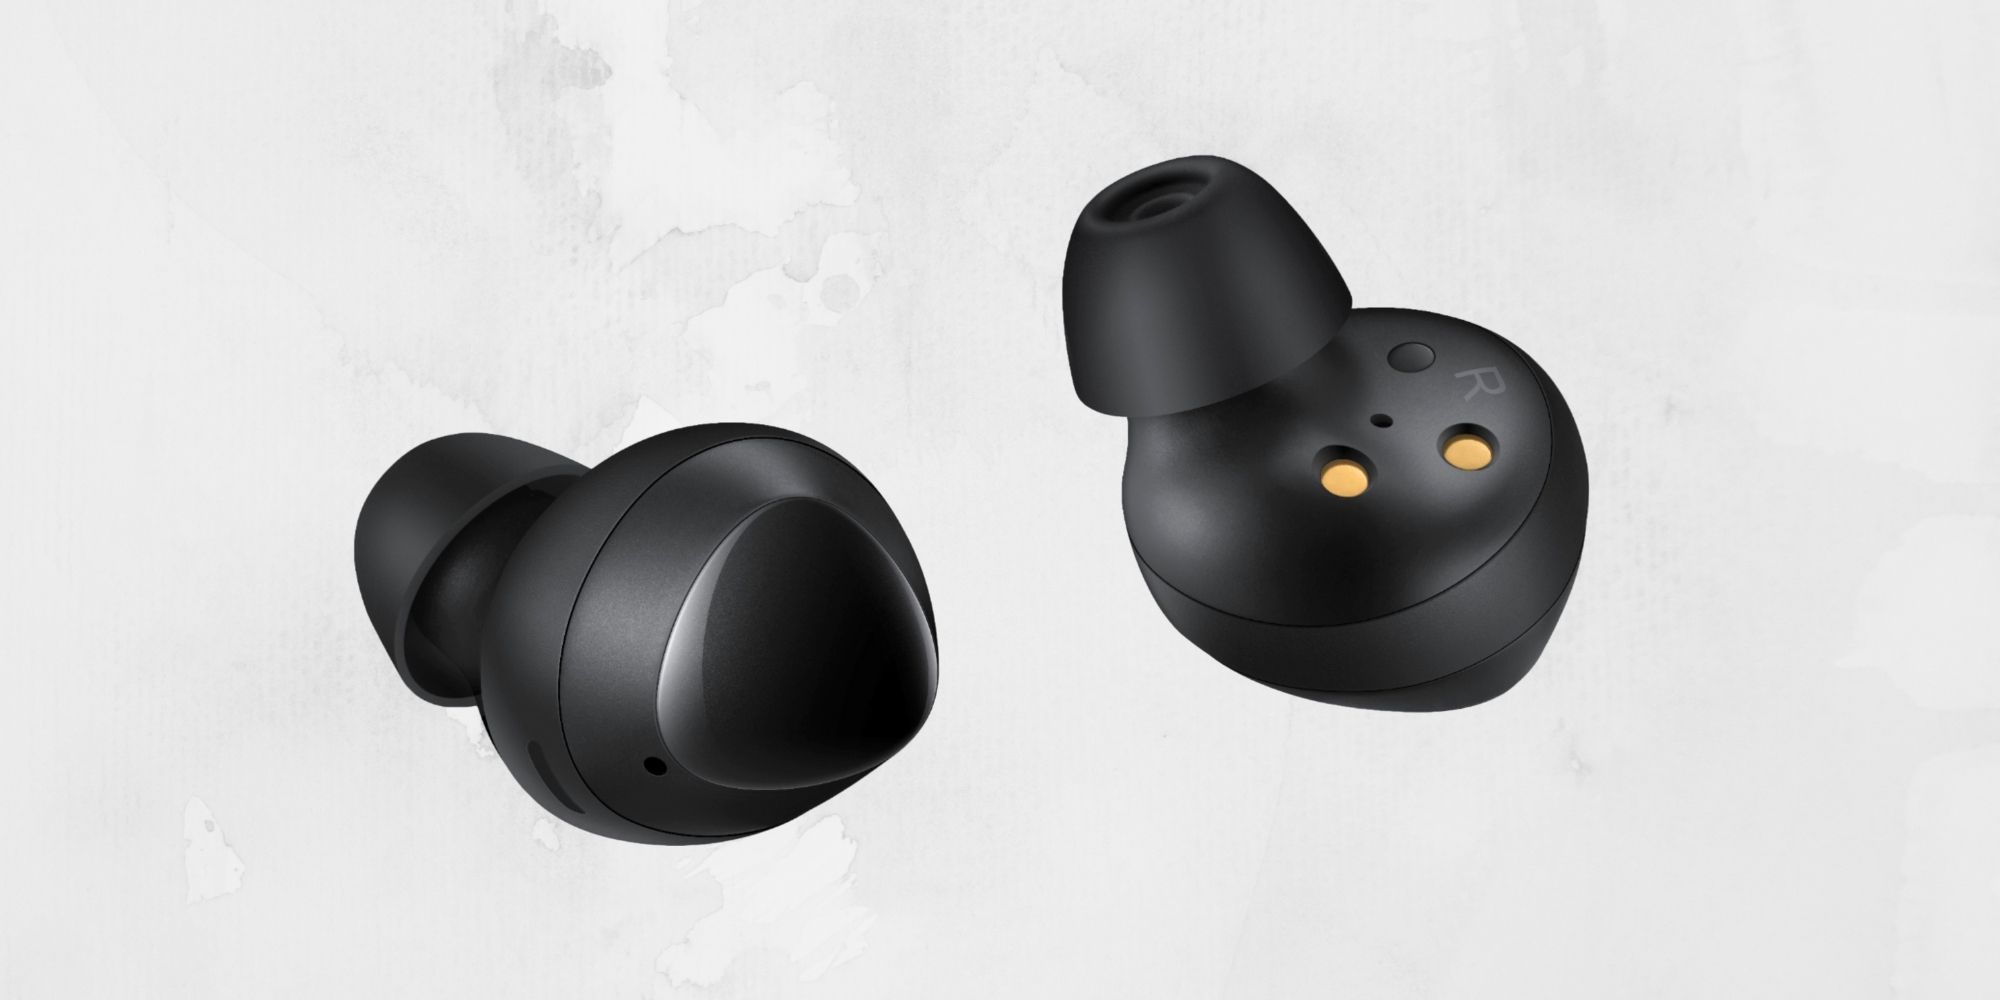 Galaxy Buds Beyond Might Be Samsung’s Next Wireless Earbuds, Here’s Why